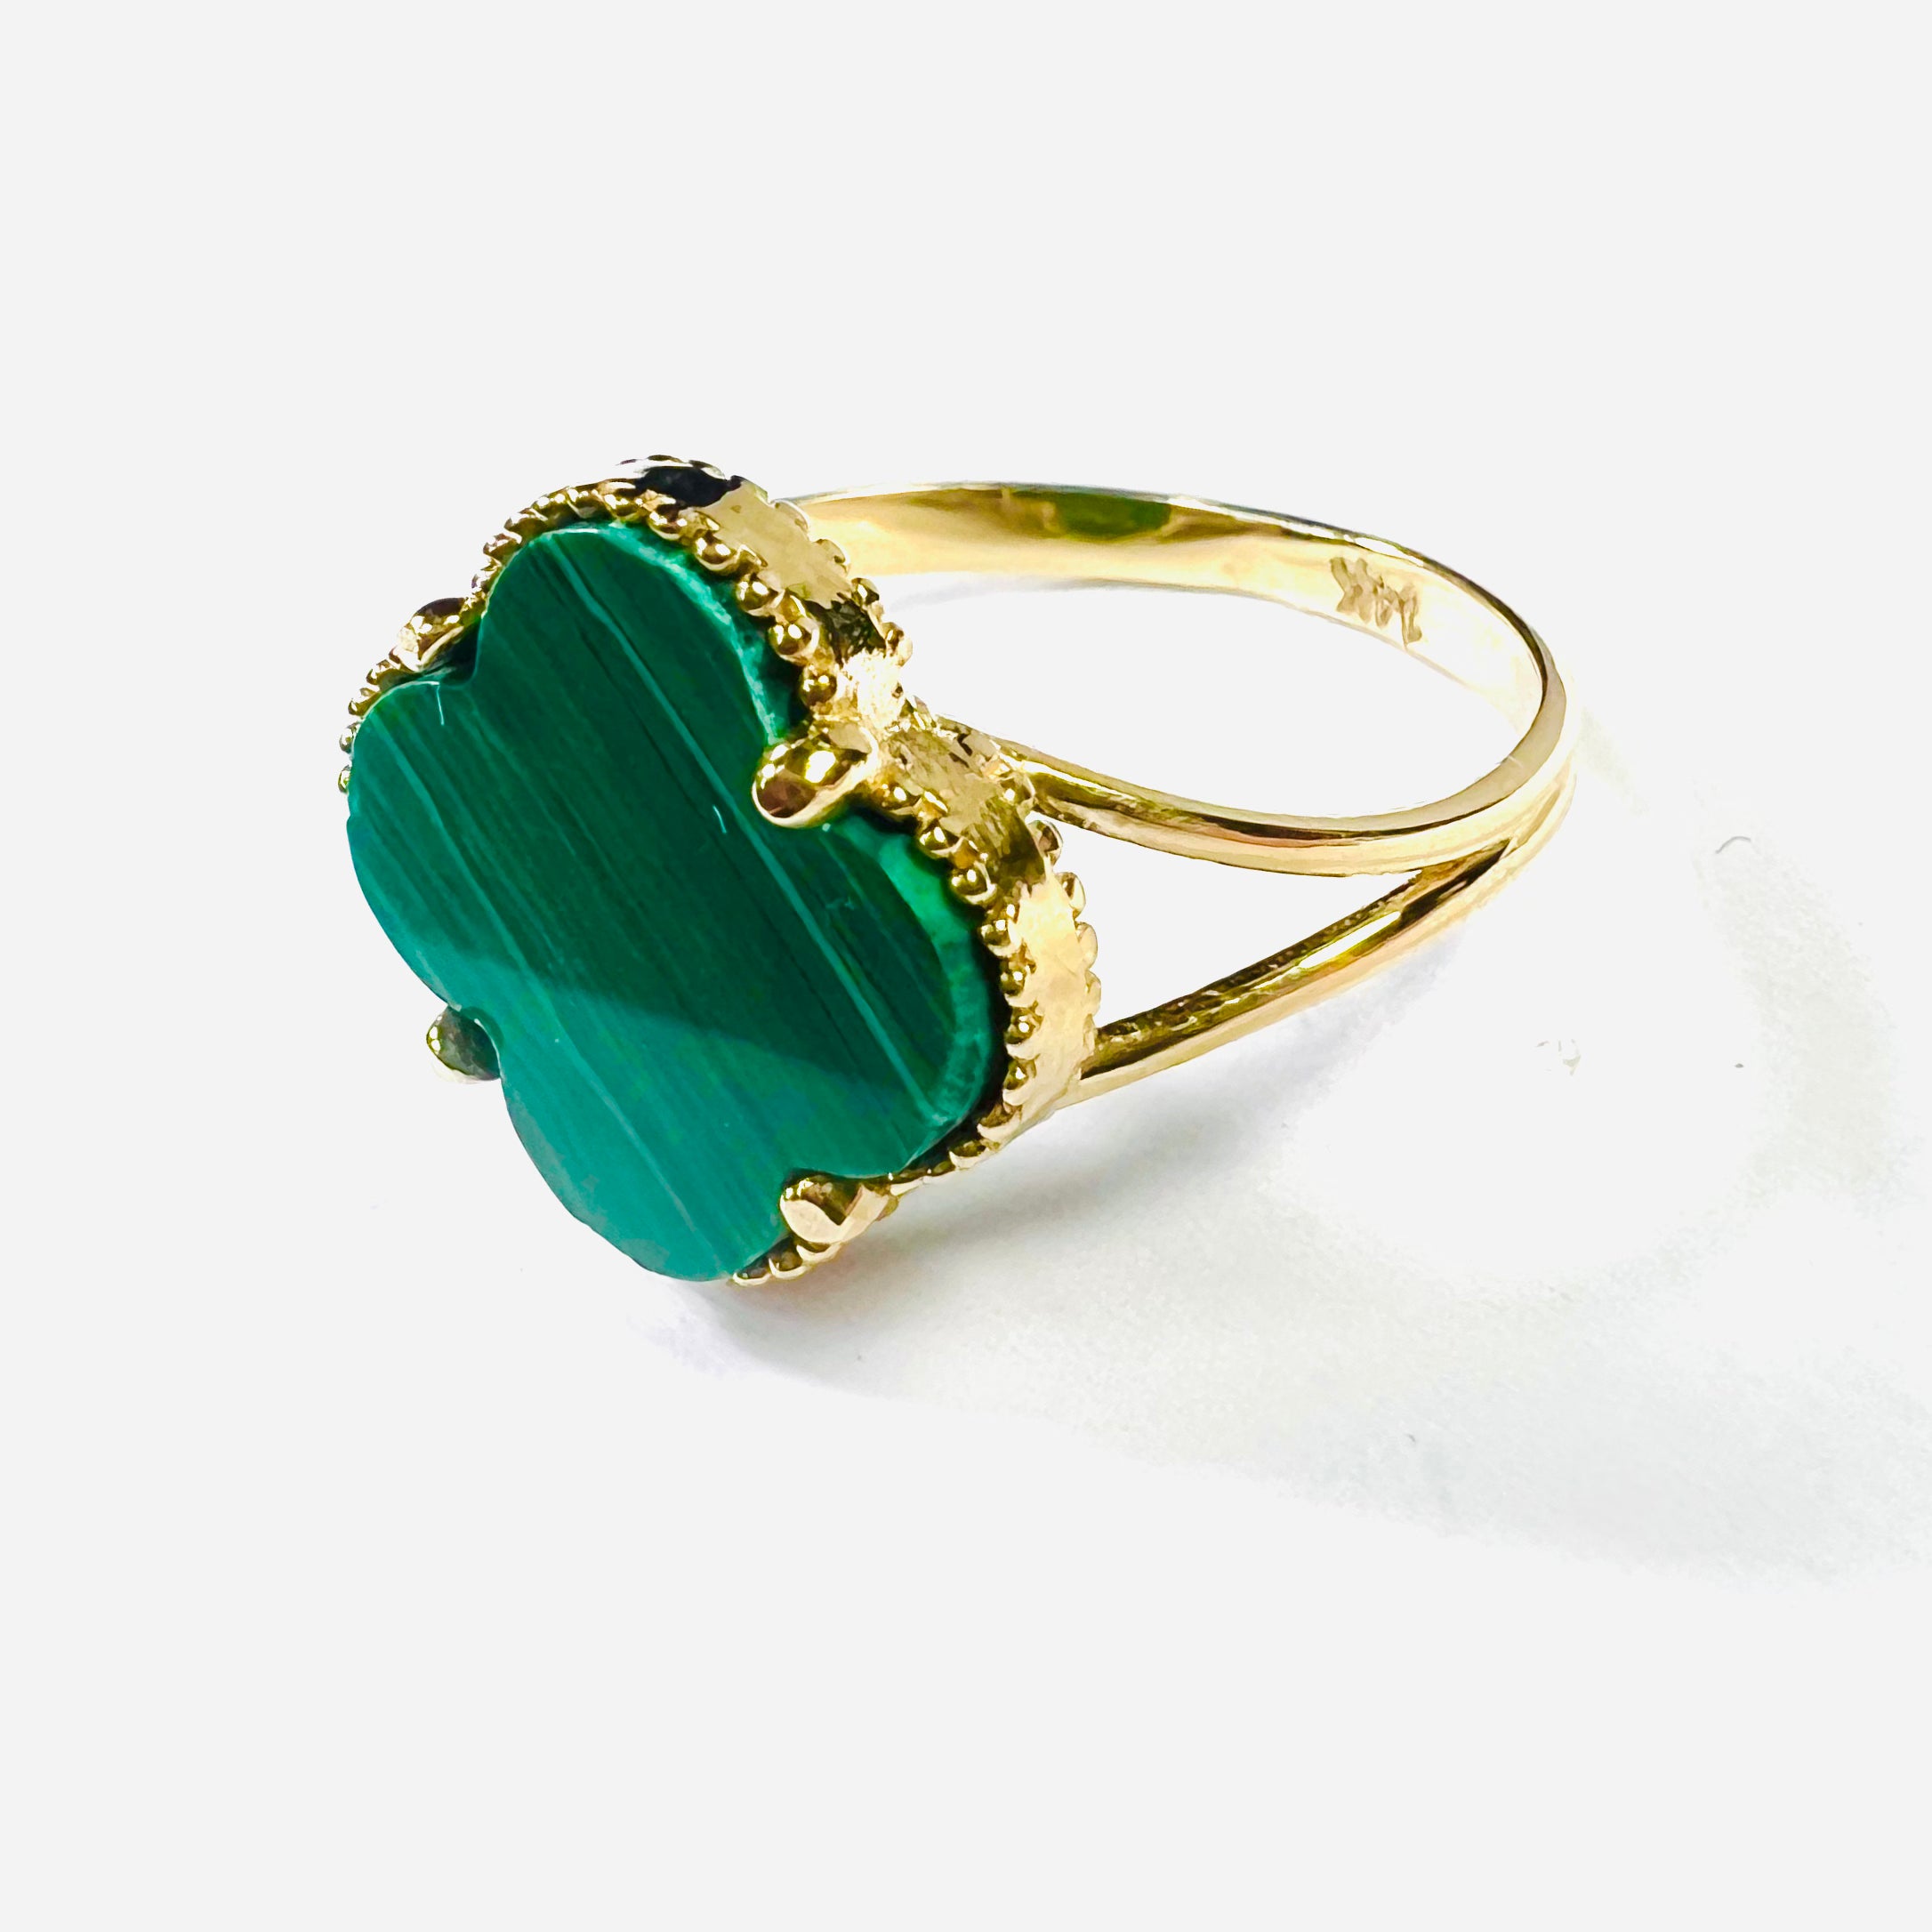 Solid 14K Yellow Gold Malachite Clover Ring Band Size 6.5